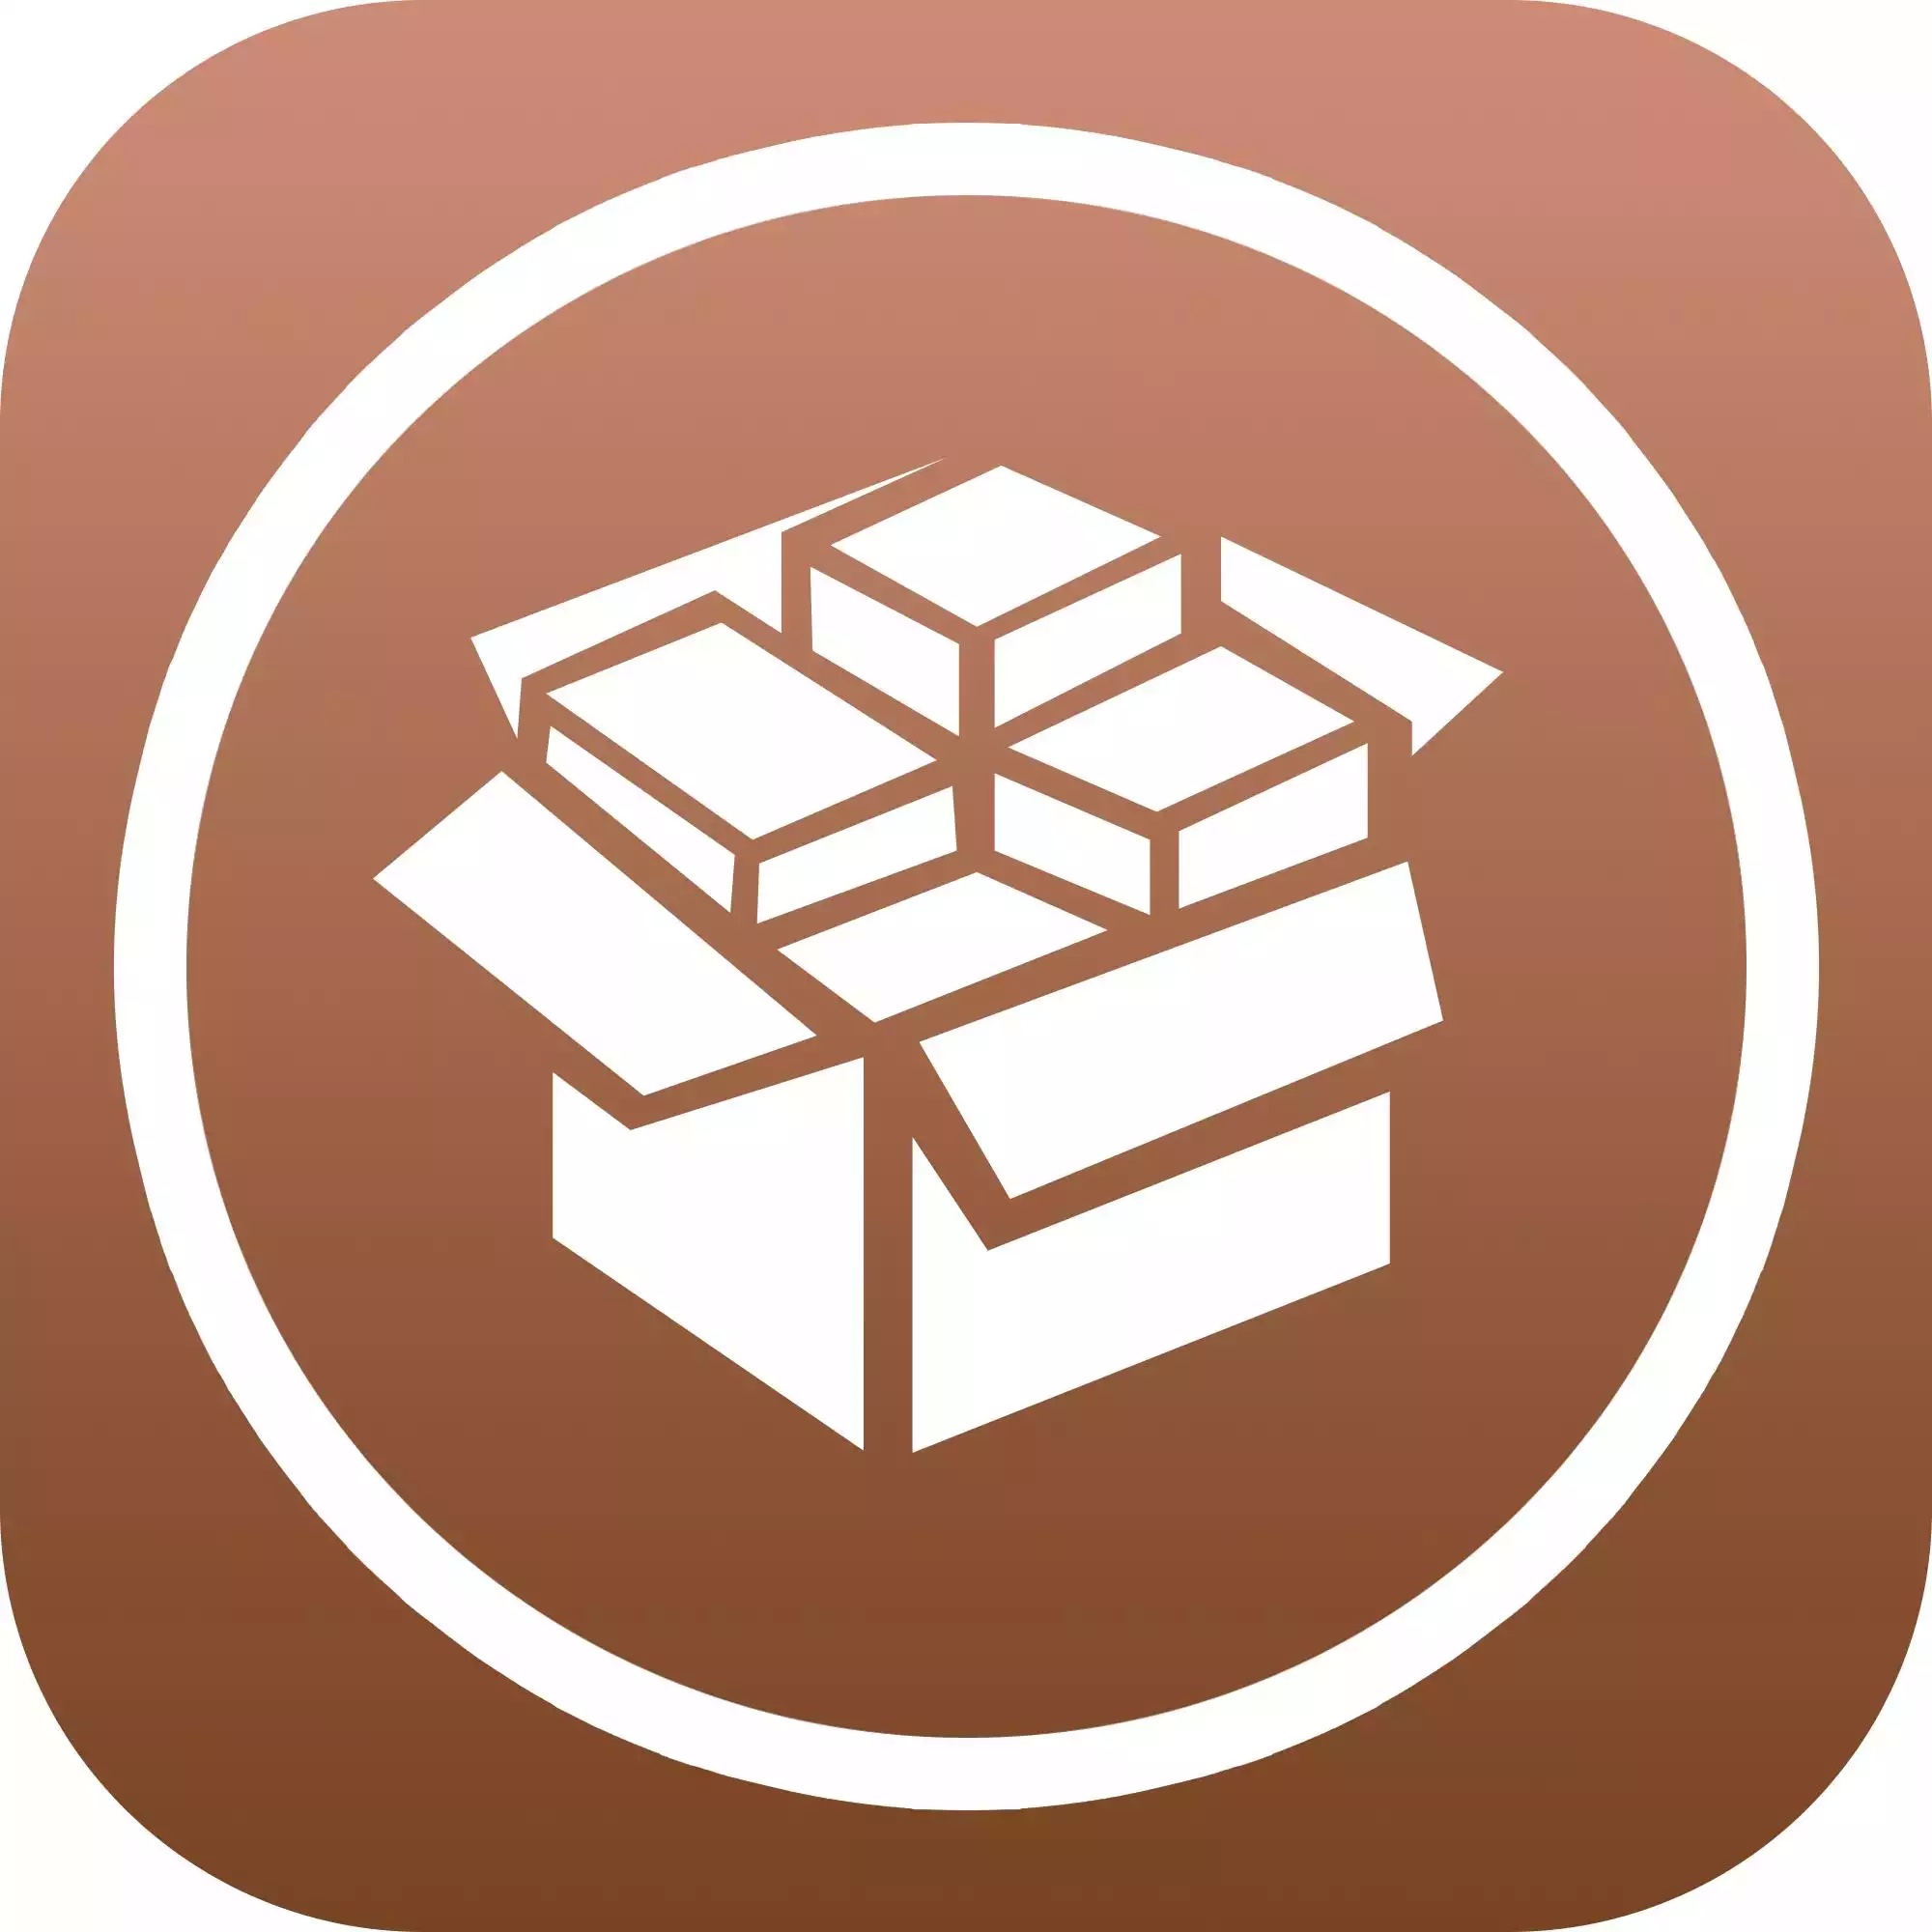 What is jailbreak and what is it for